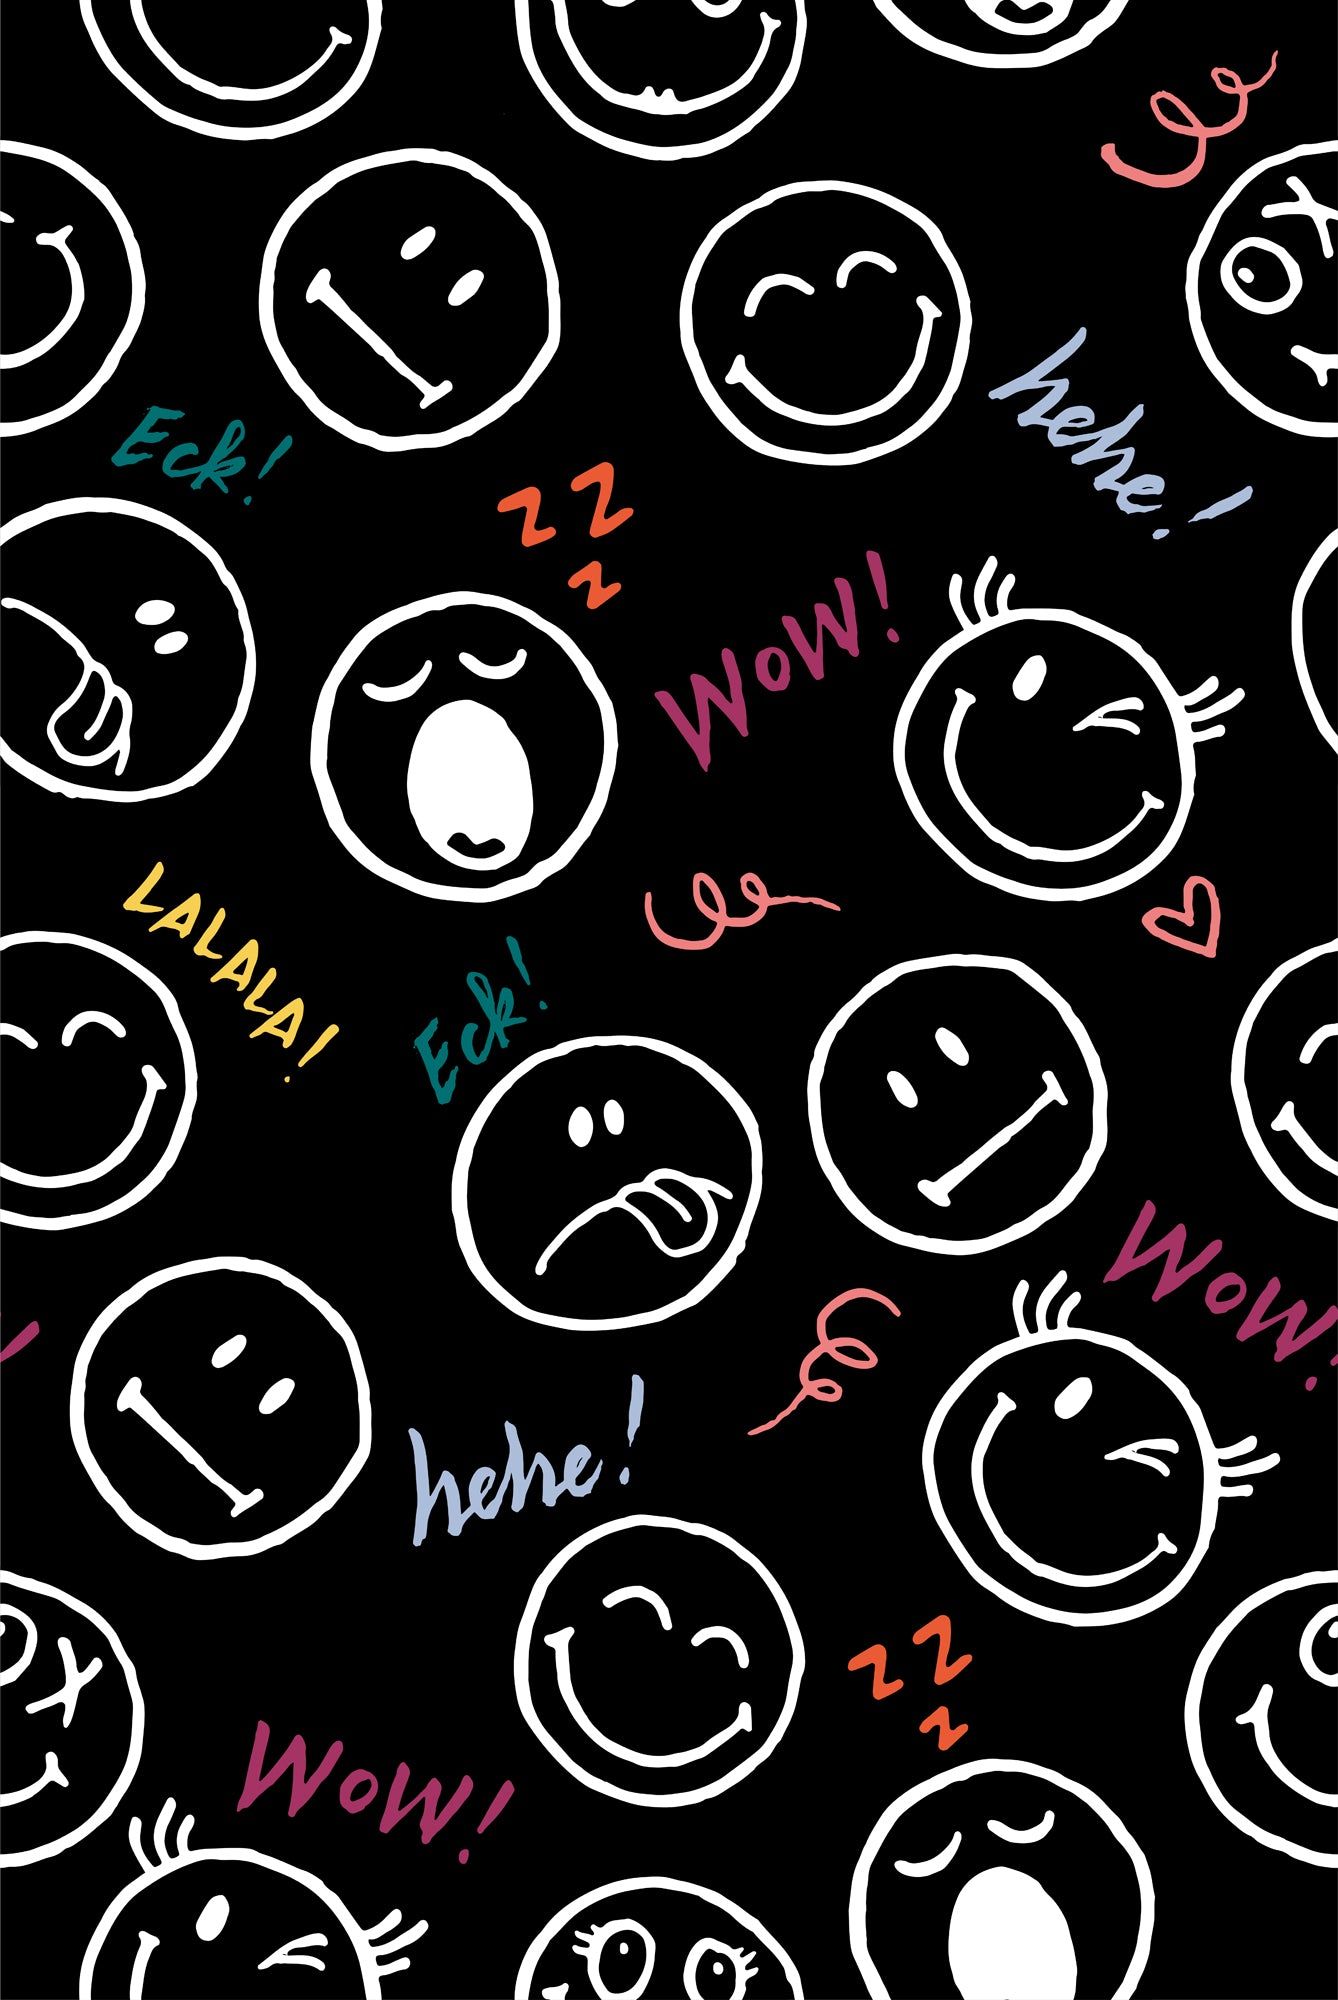 A black wallpaper with different colored smiley faces and phrases such as 